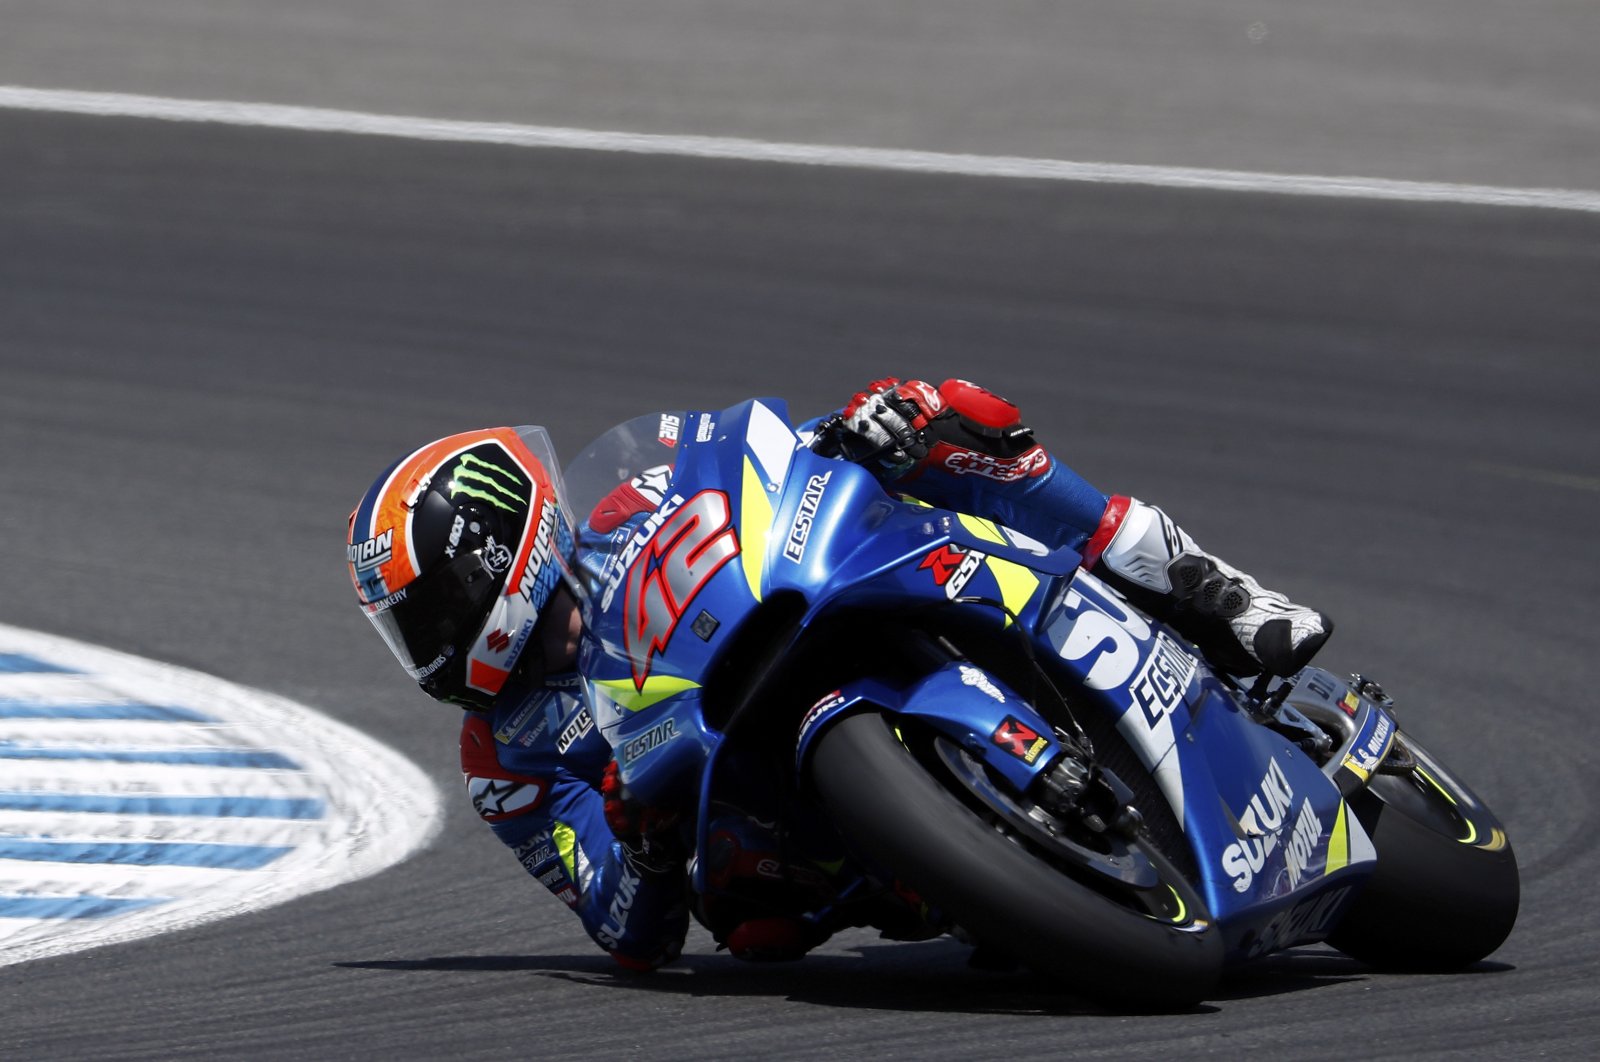 MotoGP rider Alex Rins of Spain takes a curve during the Spanish Motorcycle Grand Prix at the Angel Nieto racetrack in Jerez de la Frontera, Spain, May 5, 2019. (AP Photo)